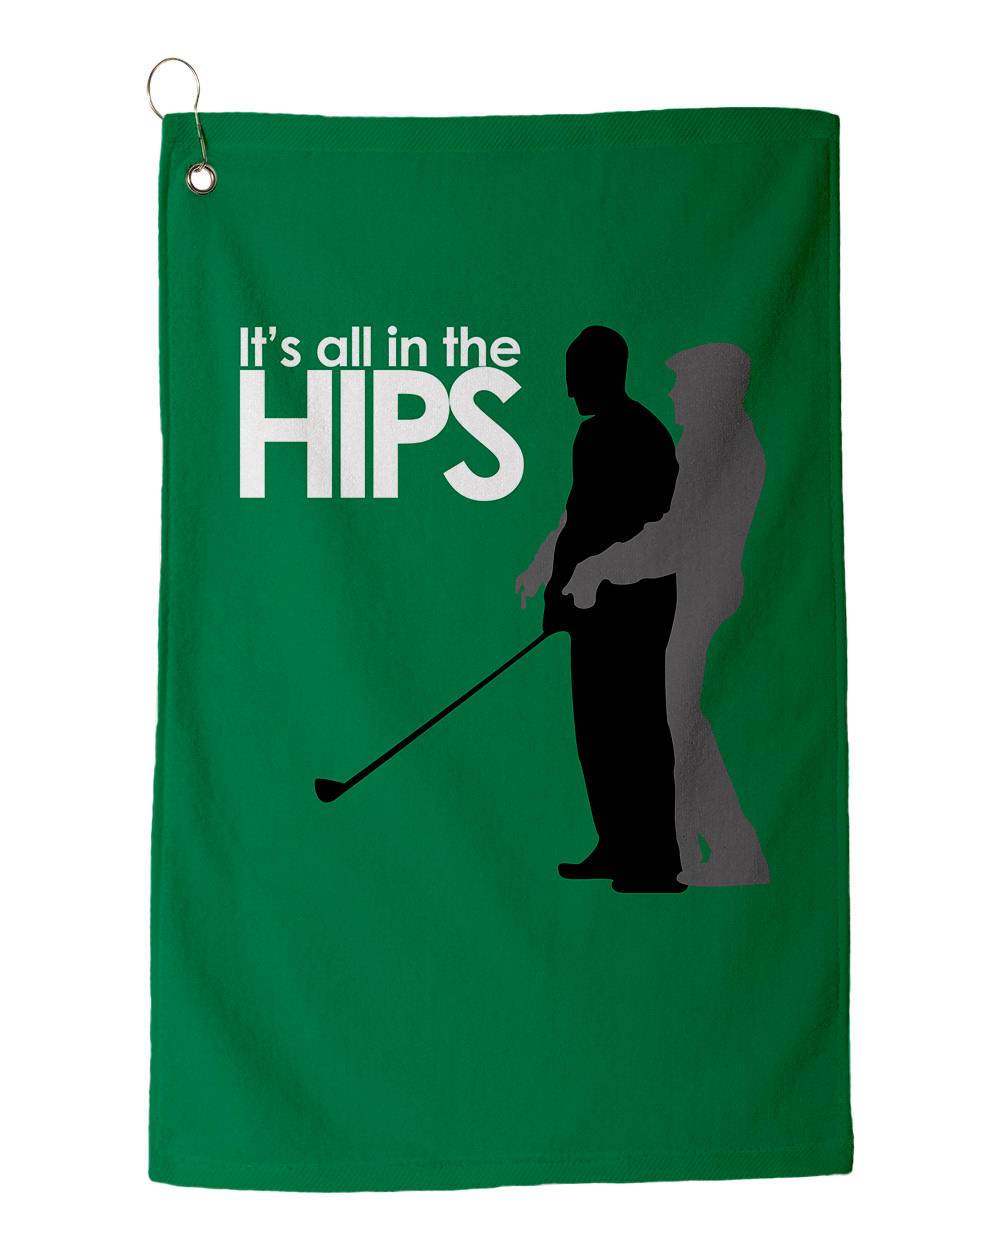 SUBLIMATION RALLY TOWEL or Sublimation Golf Towel, sublimation